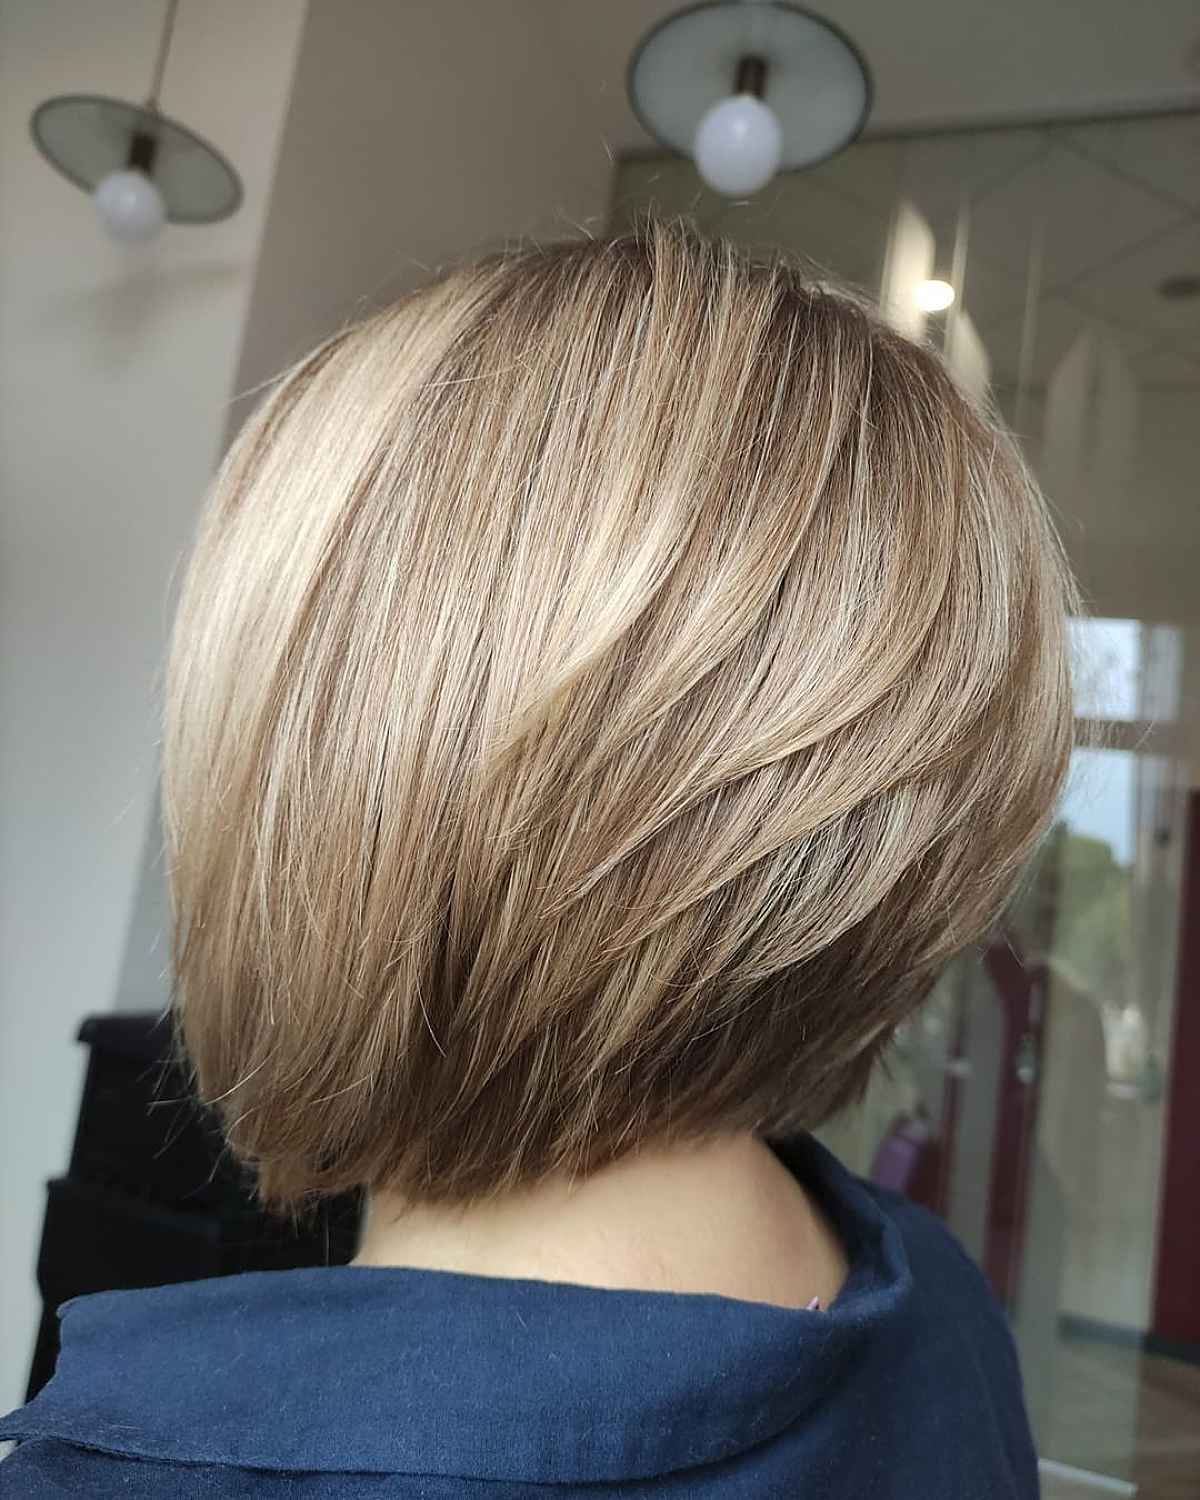 Widely Used Classy Medium Blonde Bob Haircuts Inside 32 Best Blonde Bob Hairstyles & Blonde Lobs For  (View 10 of 20)